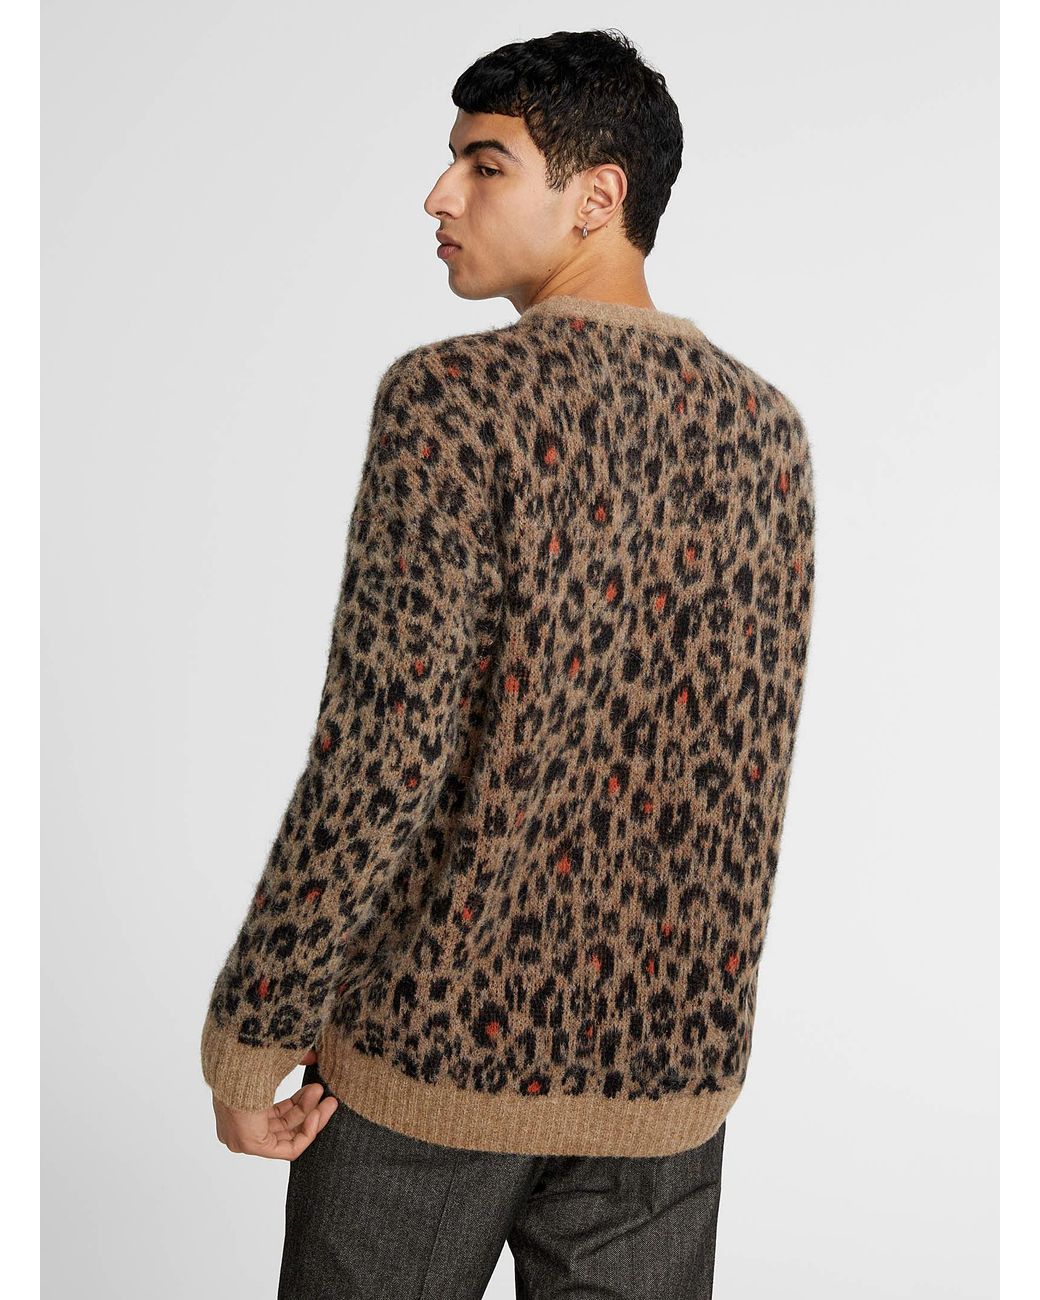 DRYKORN Leopard Jacquard Fluffy Sweater in Brown for Men | Lyst